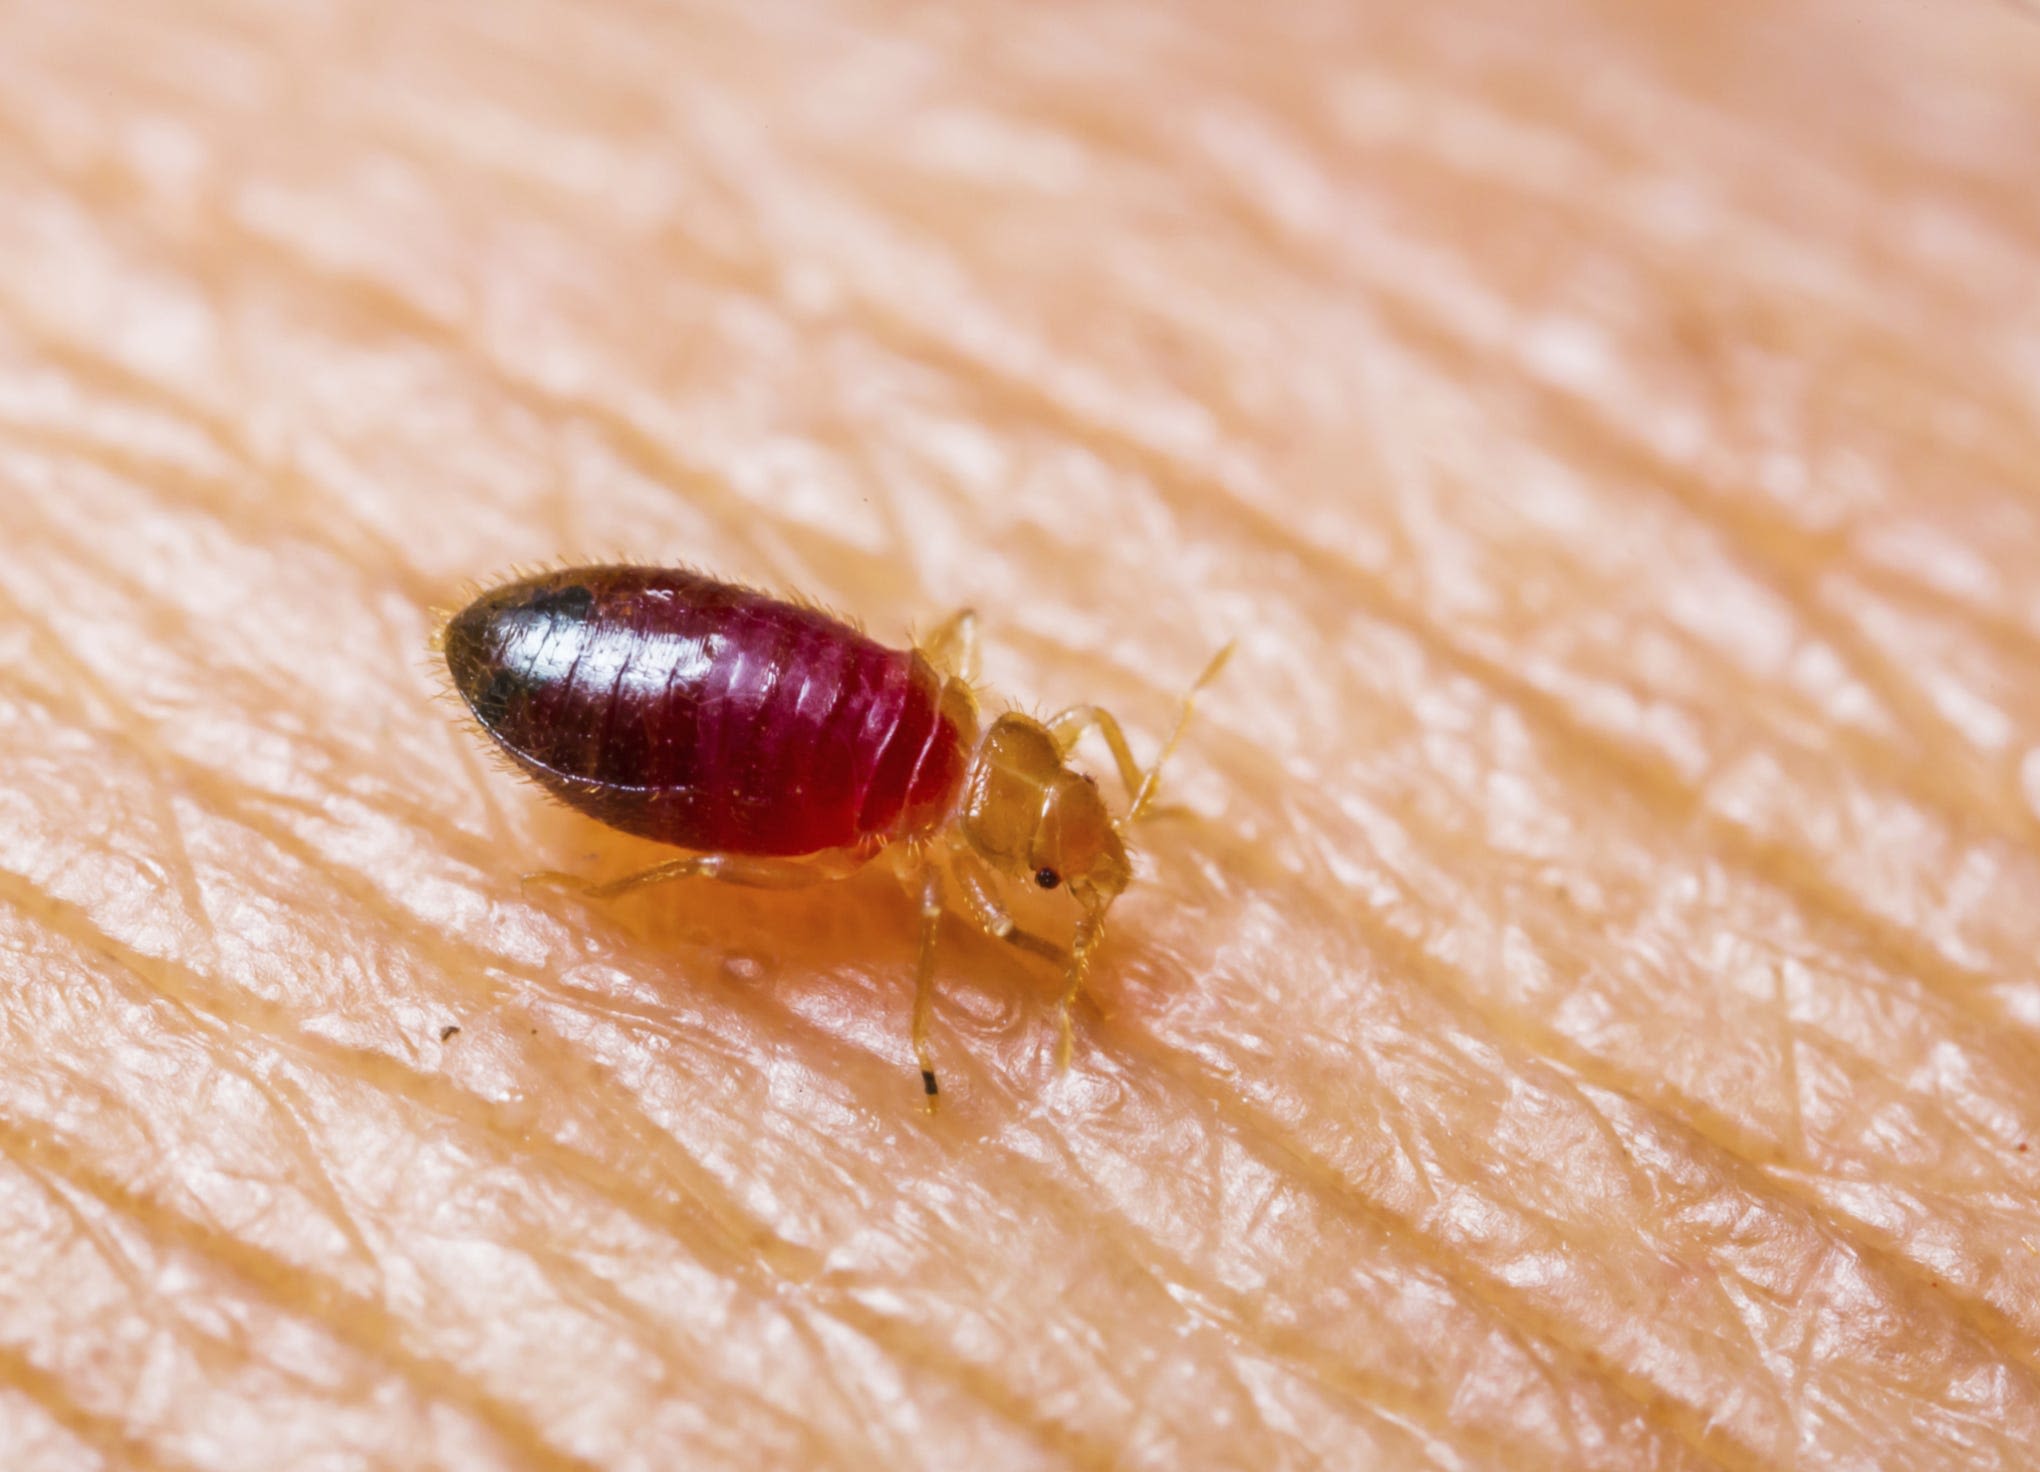 Don't let bed bugs wreck your summer vacation. Here's how to avoid these bloodsuckers